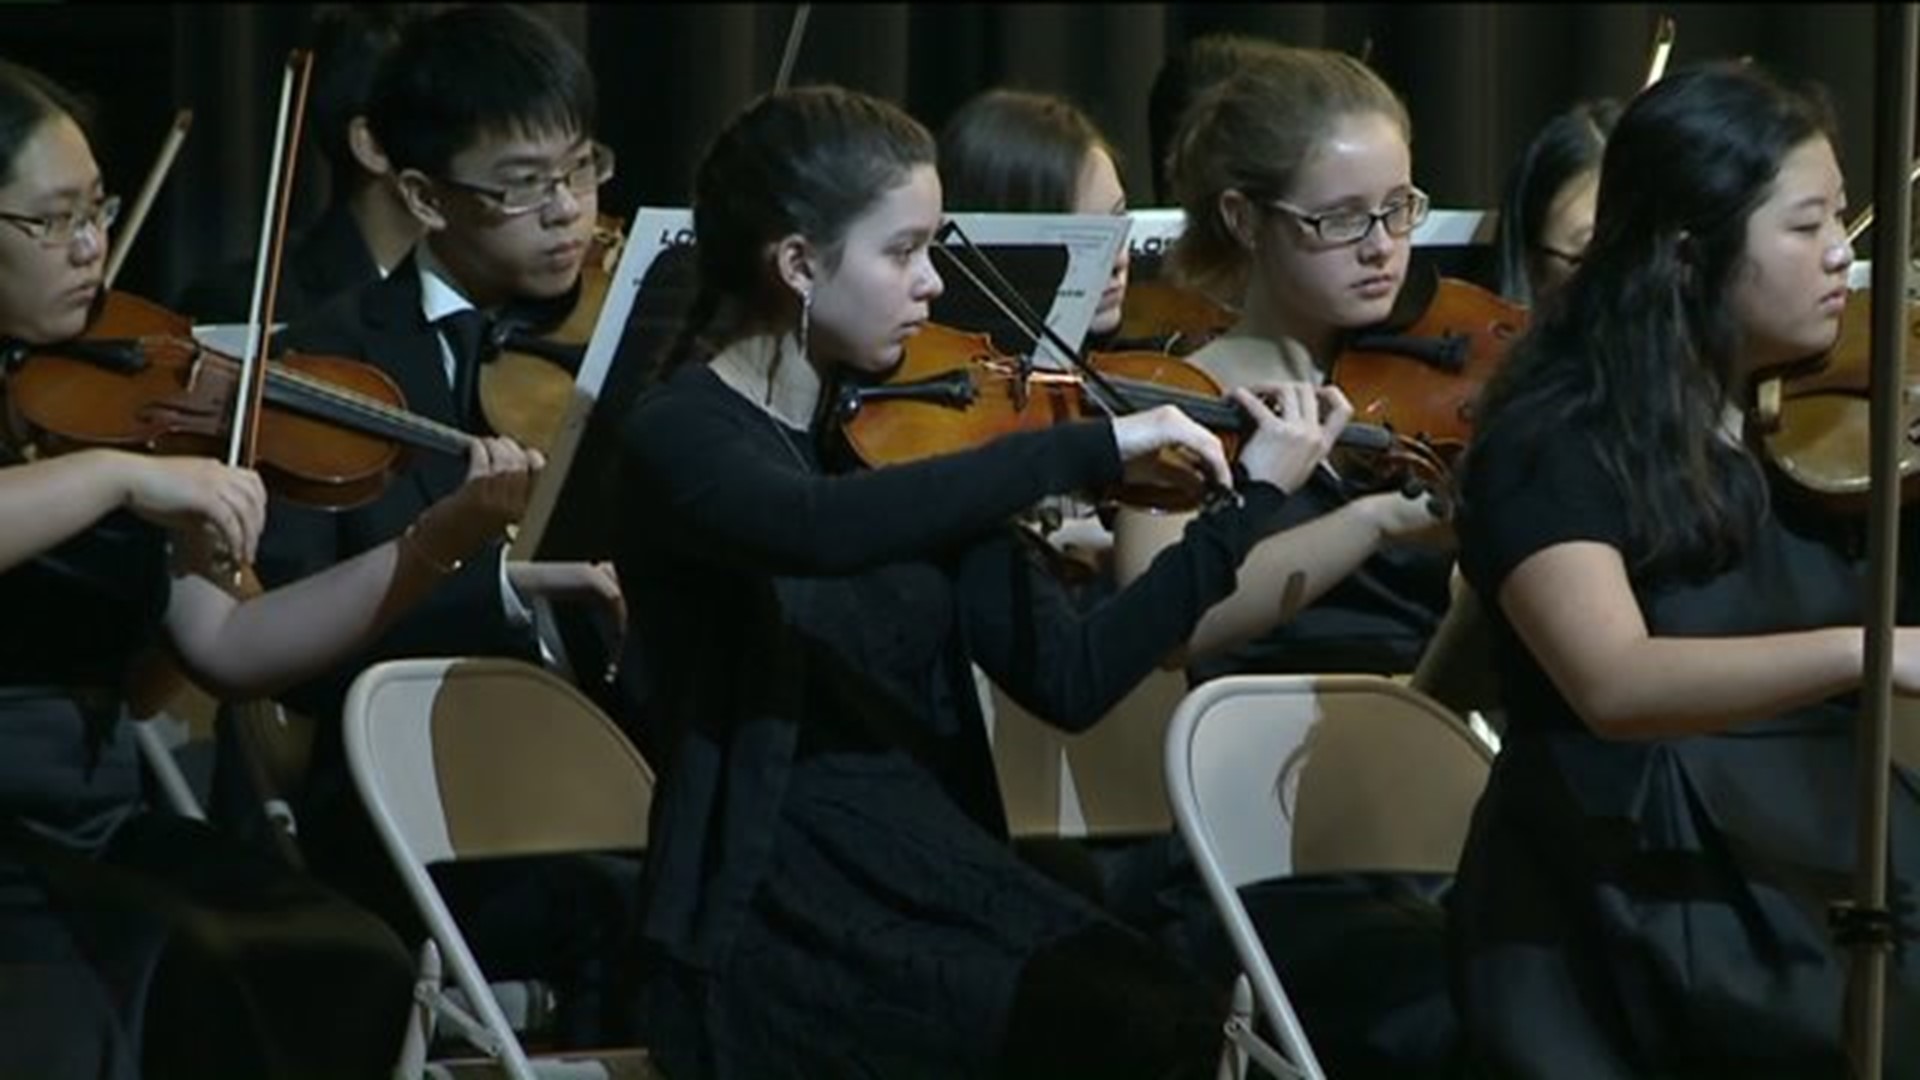 Students Come Together to Make Music in Schuylkill County